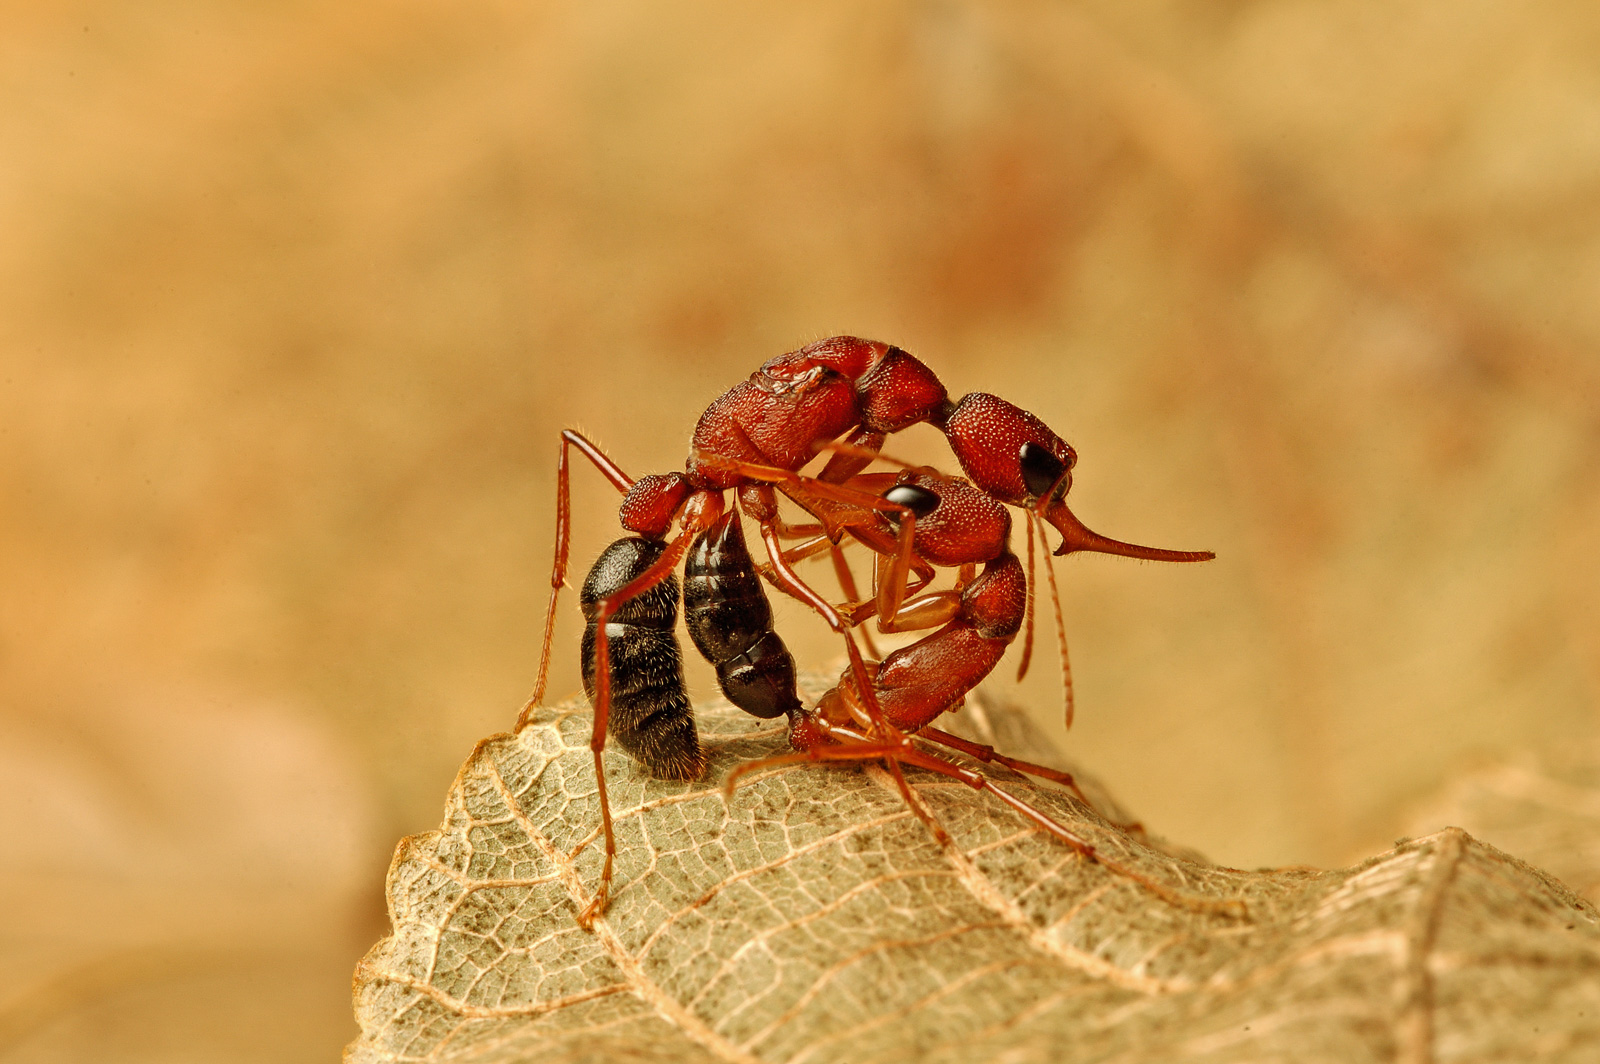 Indian Jumping Ants